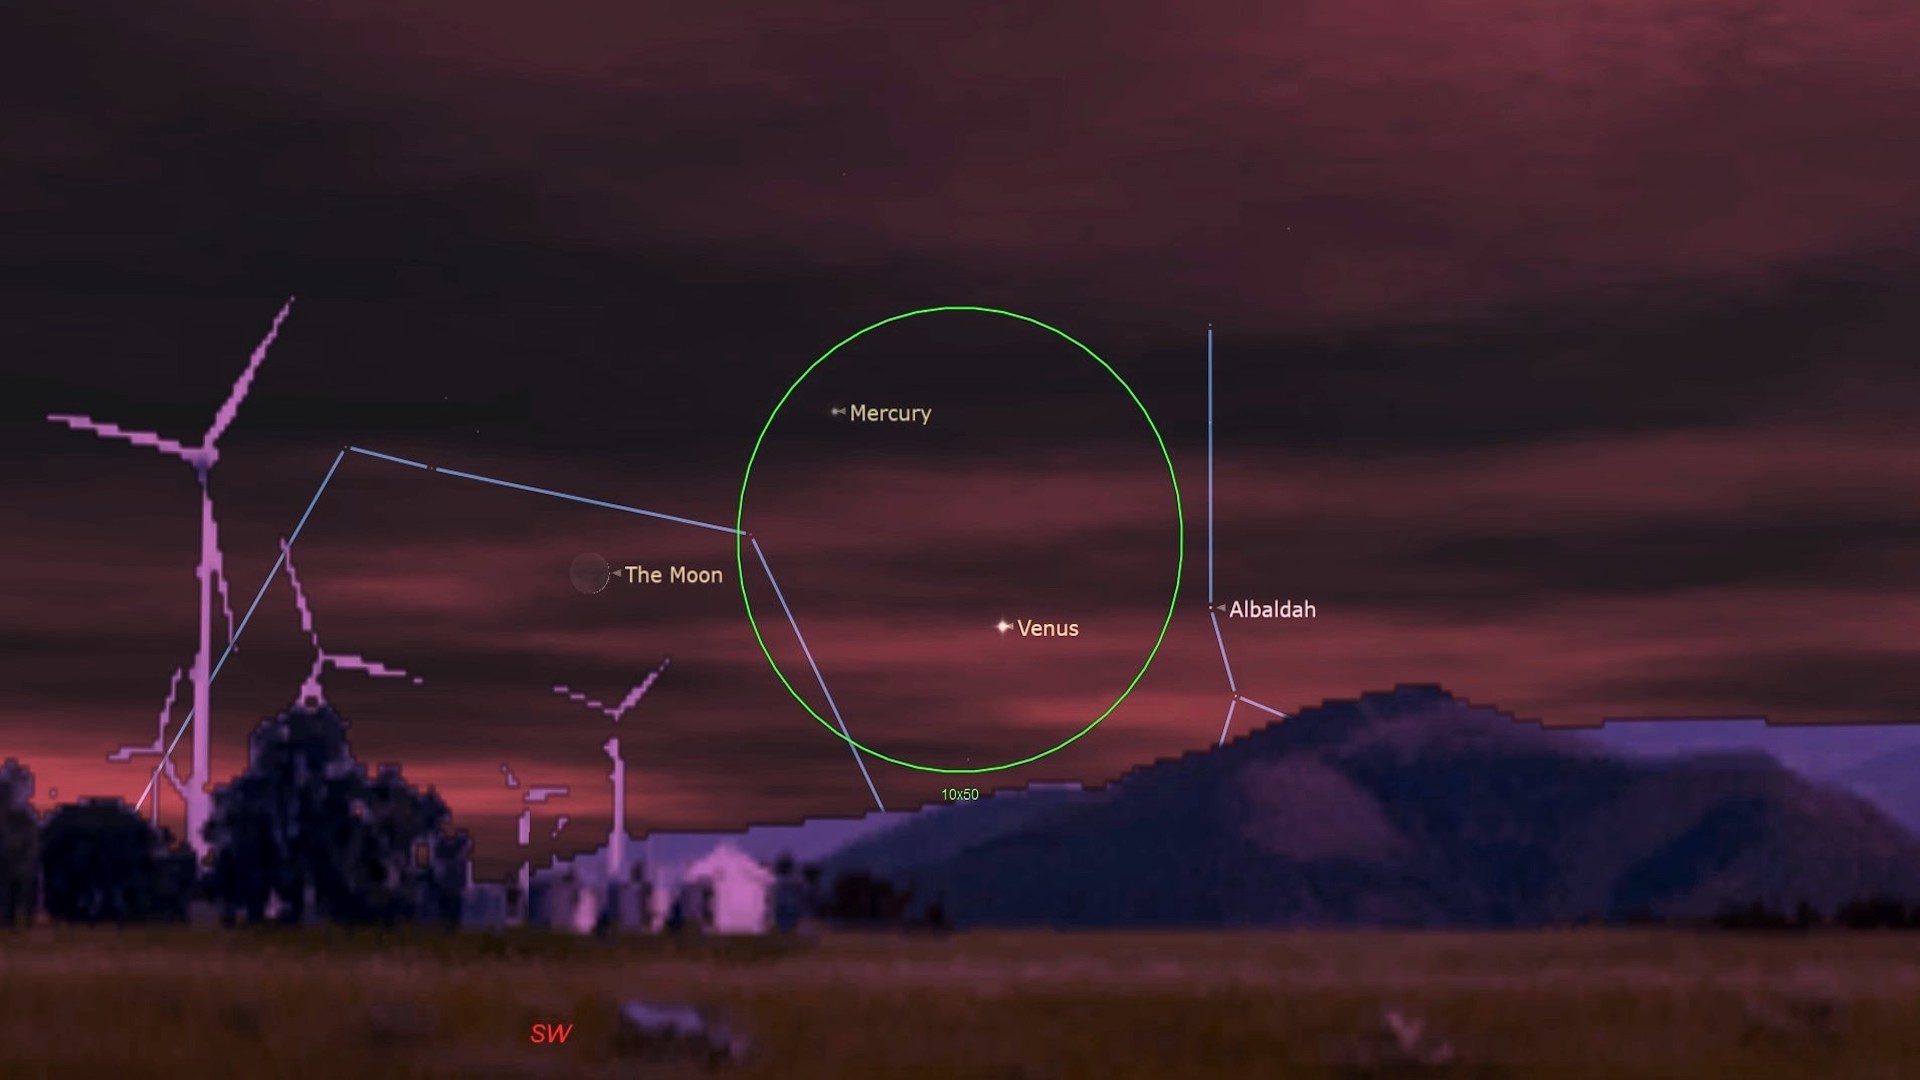 An illustration of the night sky on Dec. 24 showing Venus and Mercury's positions in the sky.